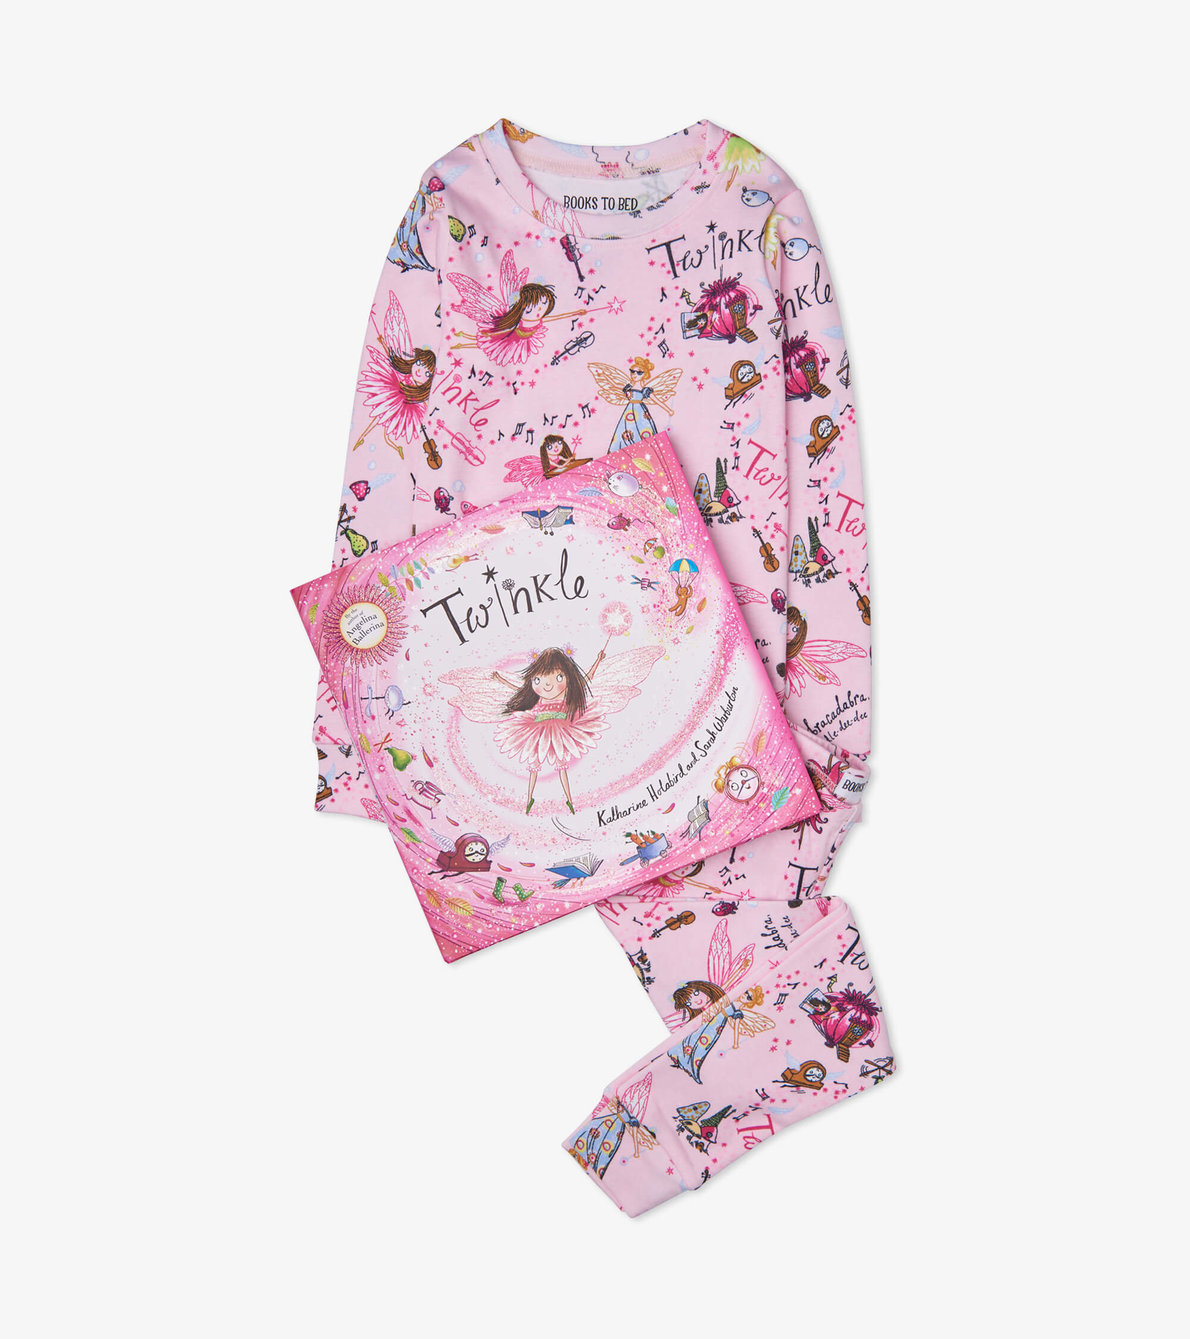 View larger image of Twinkle Book and Pajama Set